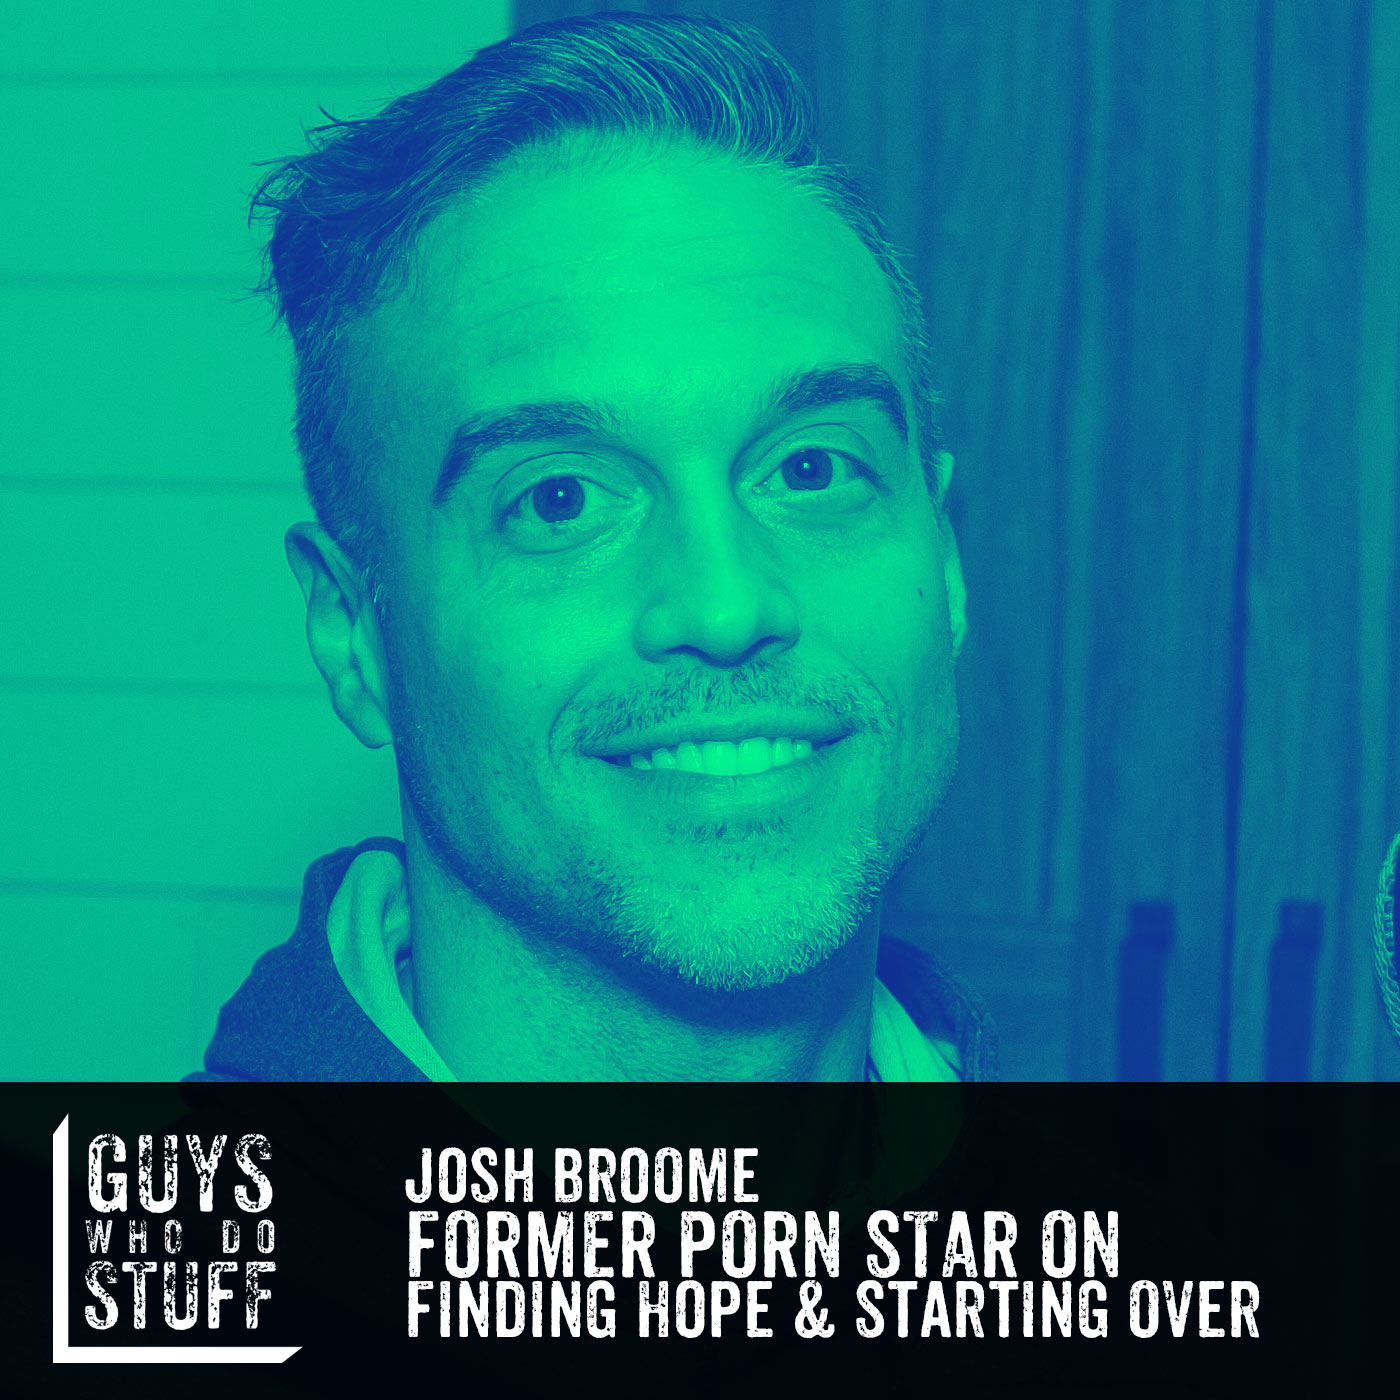 Josh Porn - Josh Broome - Former Porn Star on Finding Hope and Starting Over - Guys Who  Do Stuff